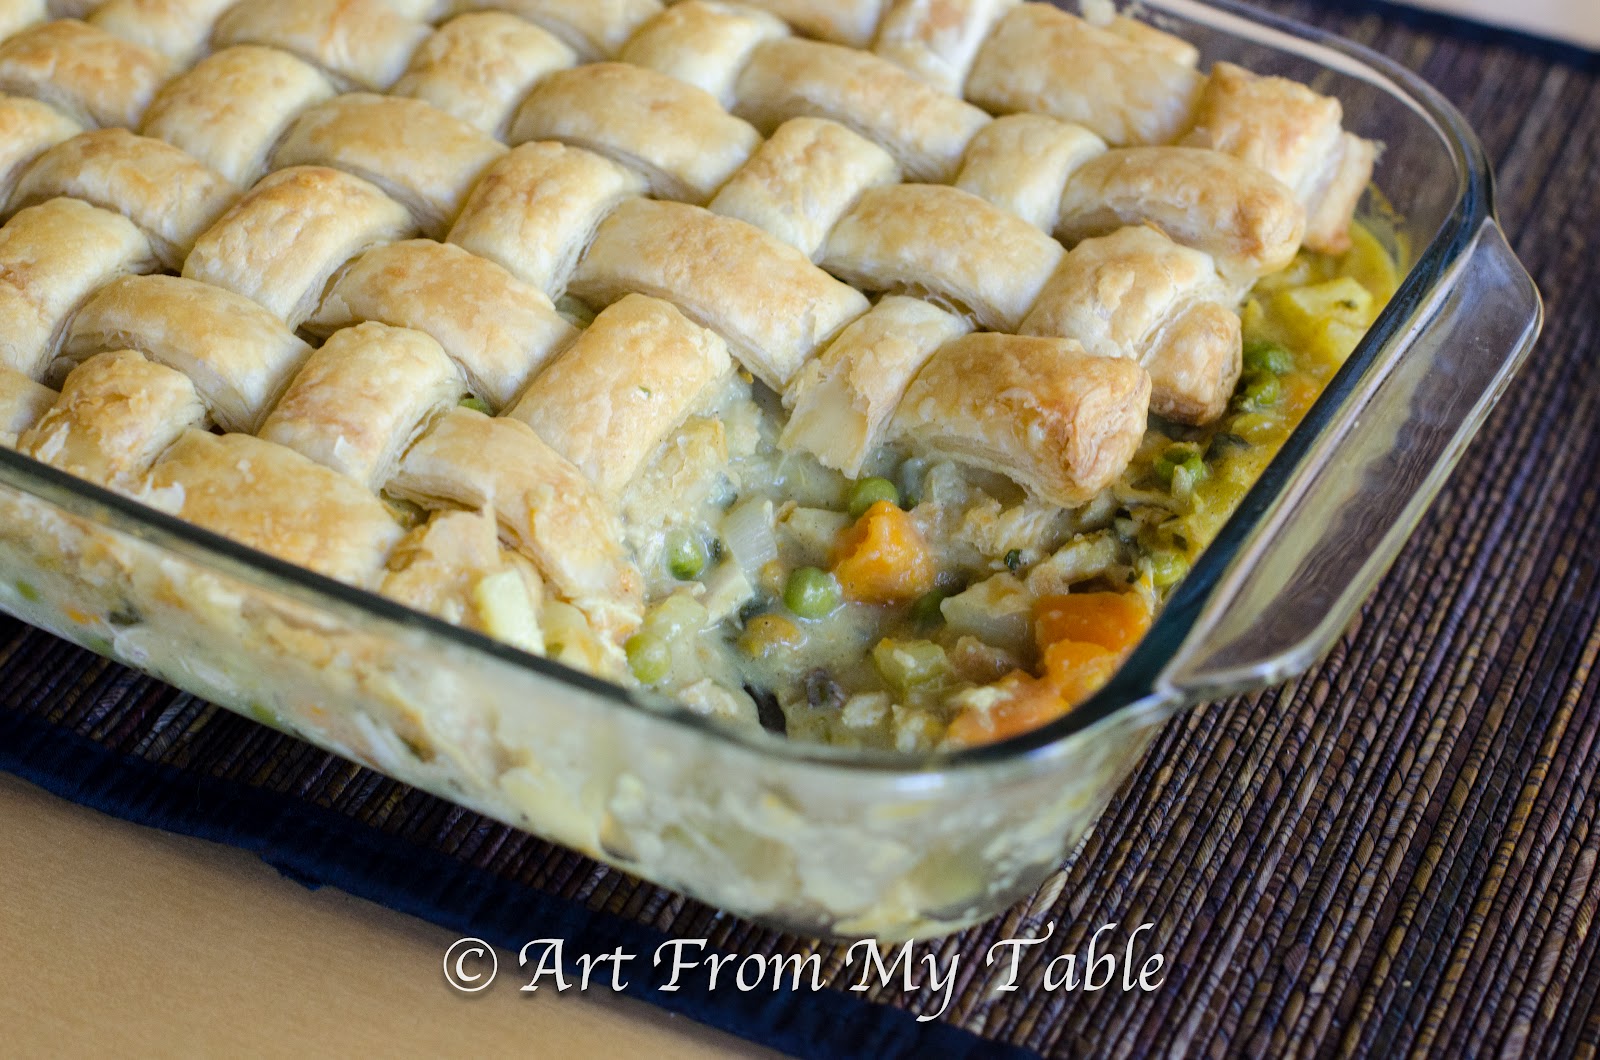 Art From My Table: Chicken Pot Pie Casserole With Sweet ...